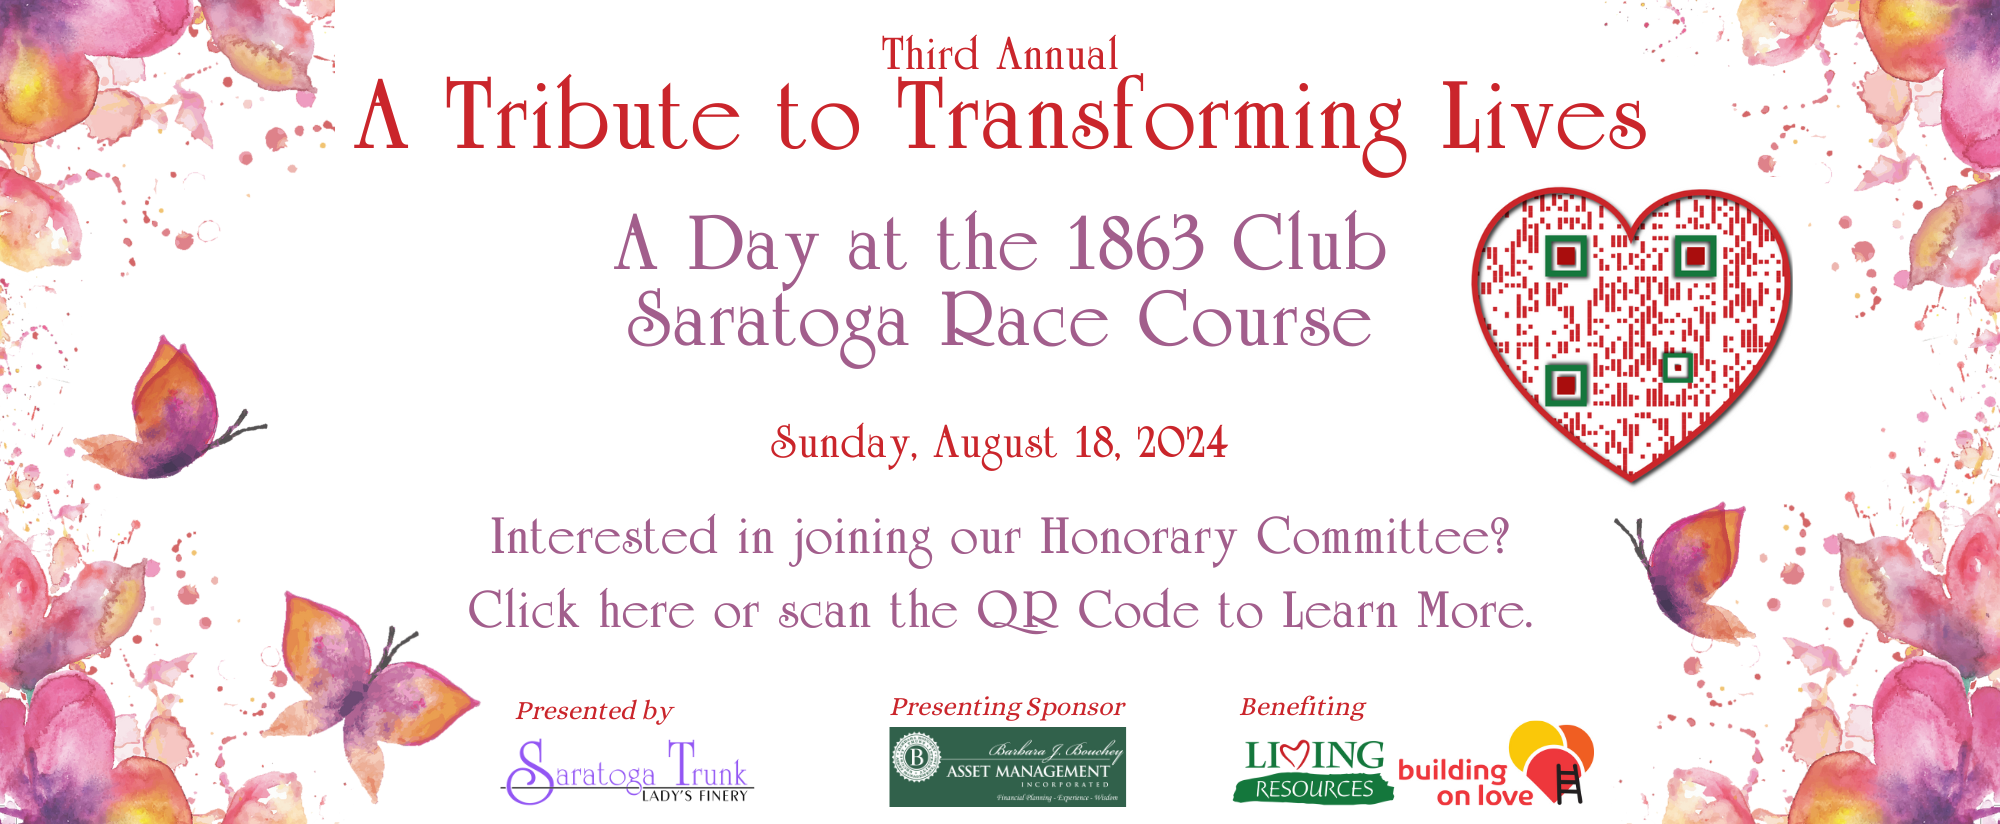 Text reads: Third Annual A Tribute to Transforming Lives. A Day at the 1863 Club. Saratoga Race Course. Sunday, August 18, 2024. Interested in joining our honorary committee? Click here or scan the QR code to learn more. Presented by Saratoga Trunk. Presenting Sponsor: Barbara Bouchey. Benefiting Living Resources and Building on Love